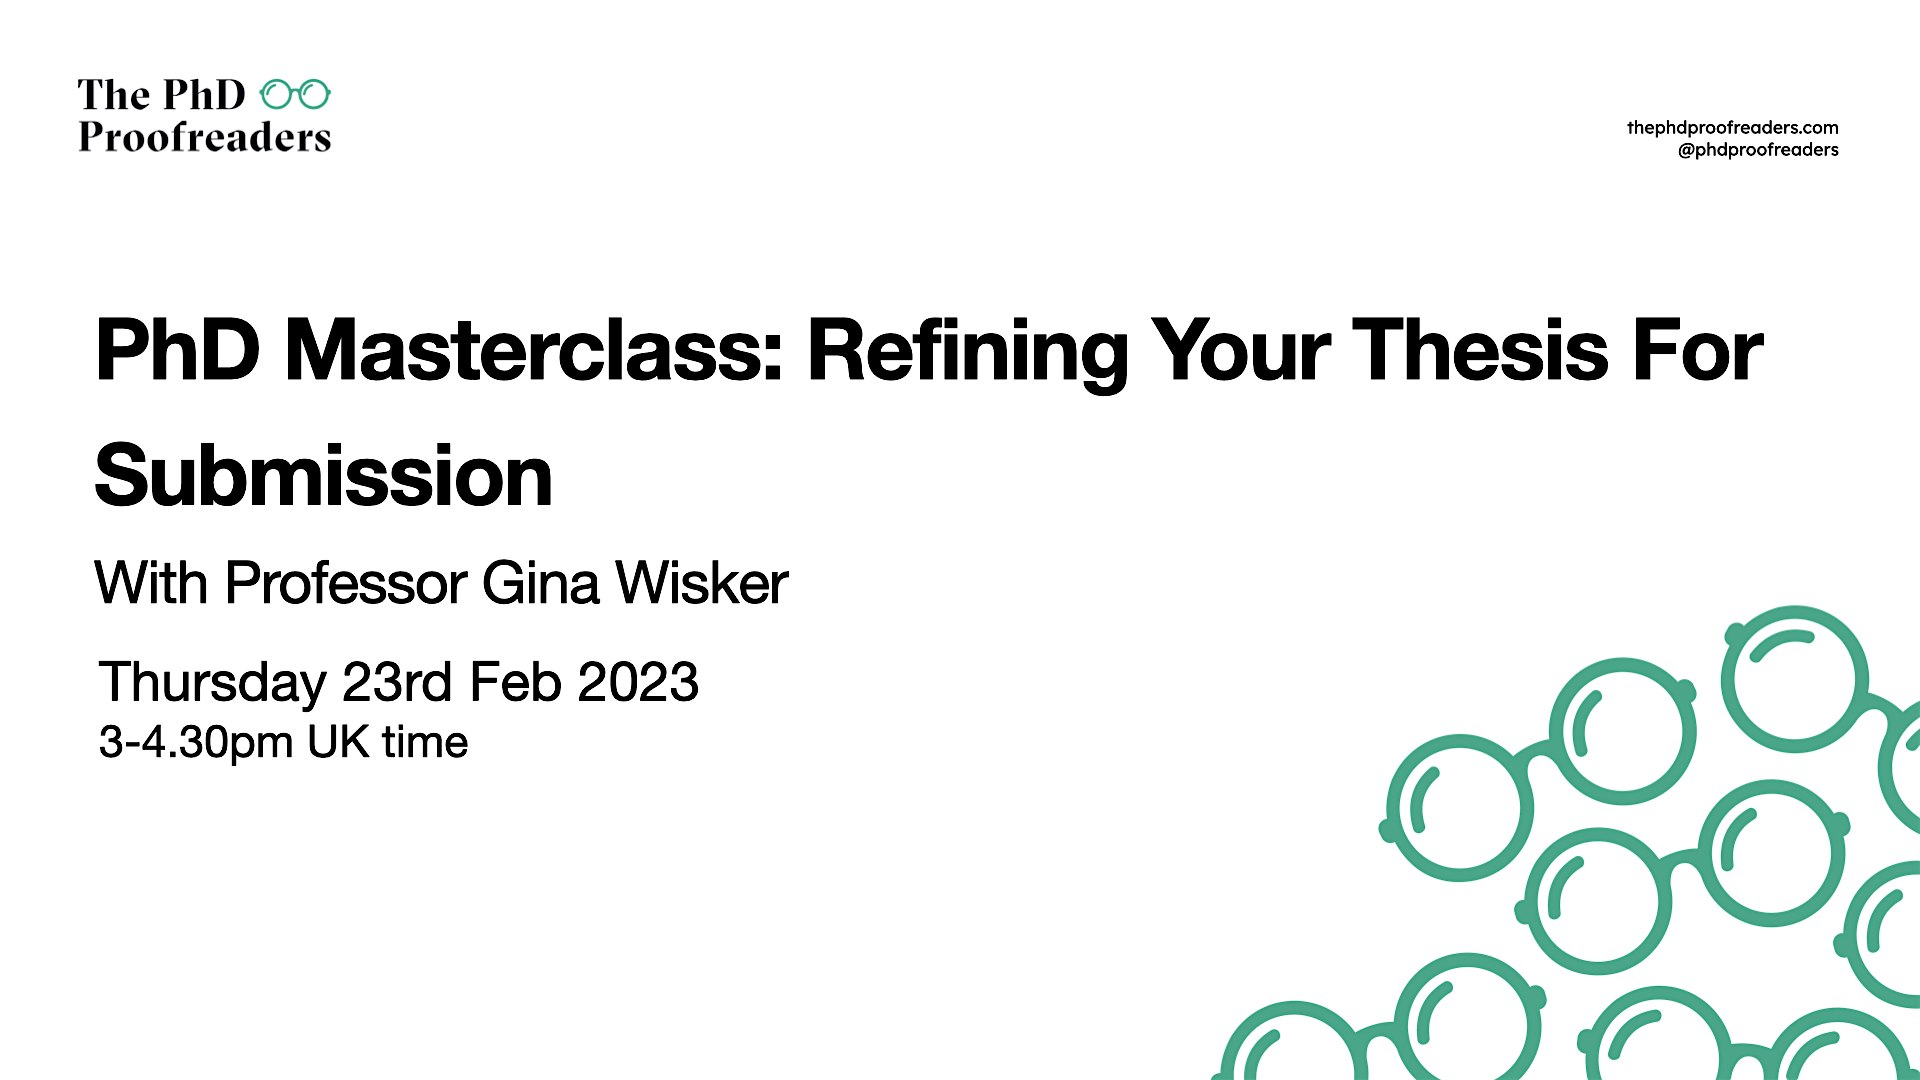 PhD Masterclass: Refining Your Thesis For Submission